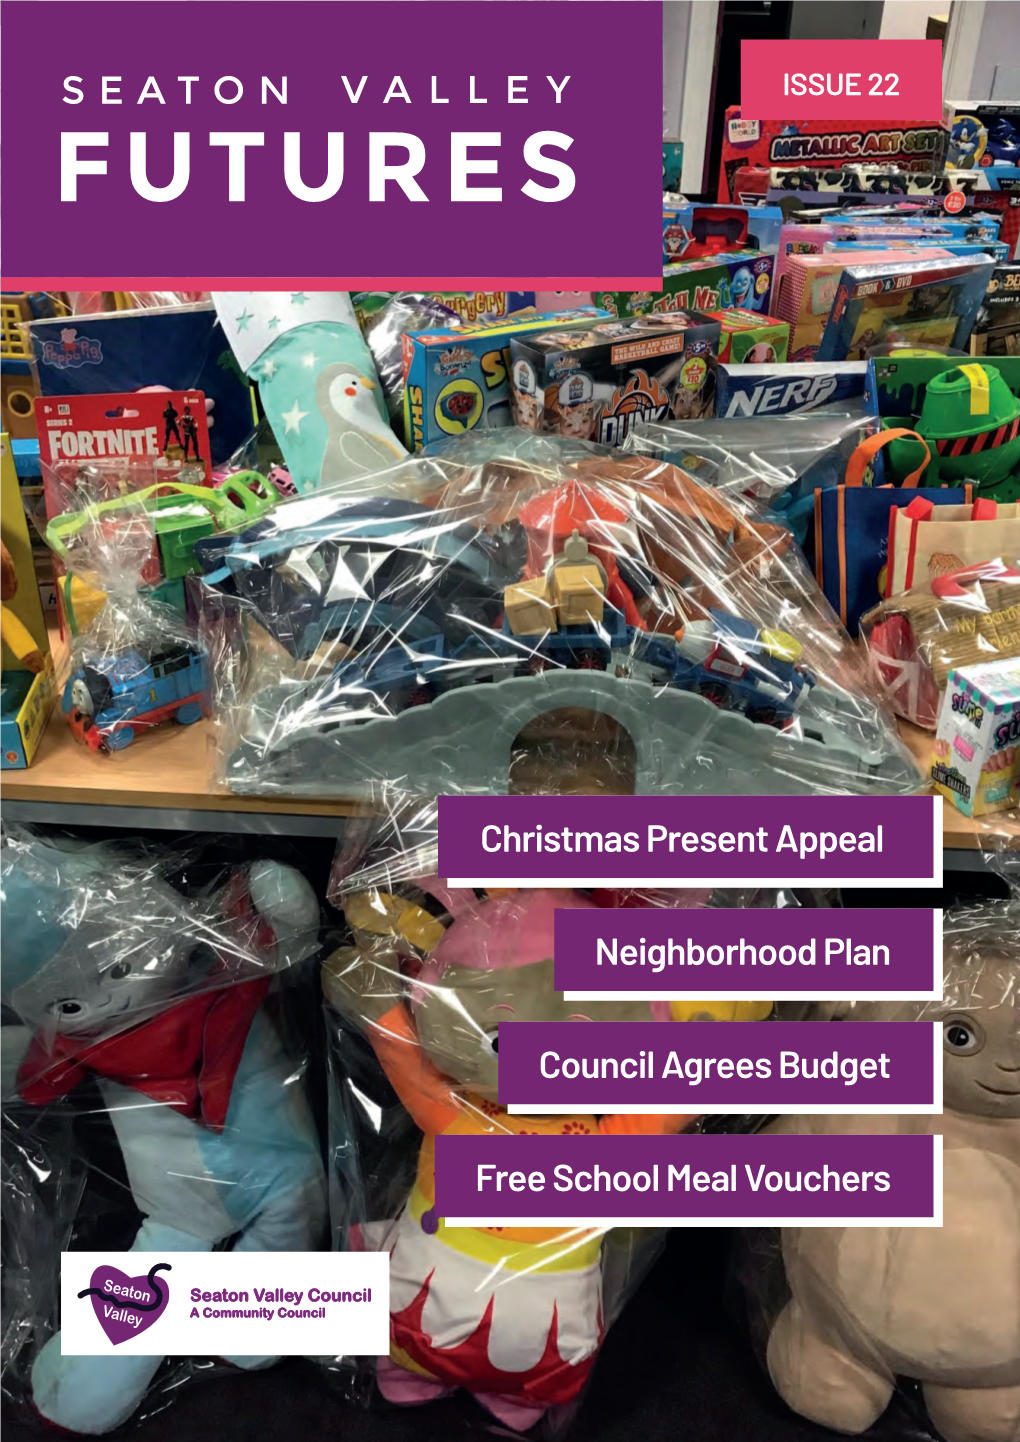 Christmas Present Appeal Free School Meal Vouchers Council Agrees Budget Neighborhood Plan